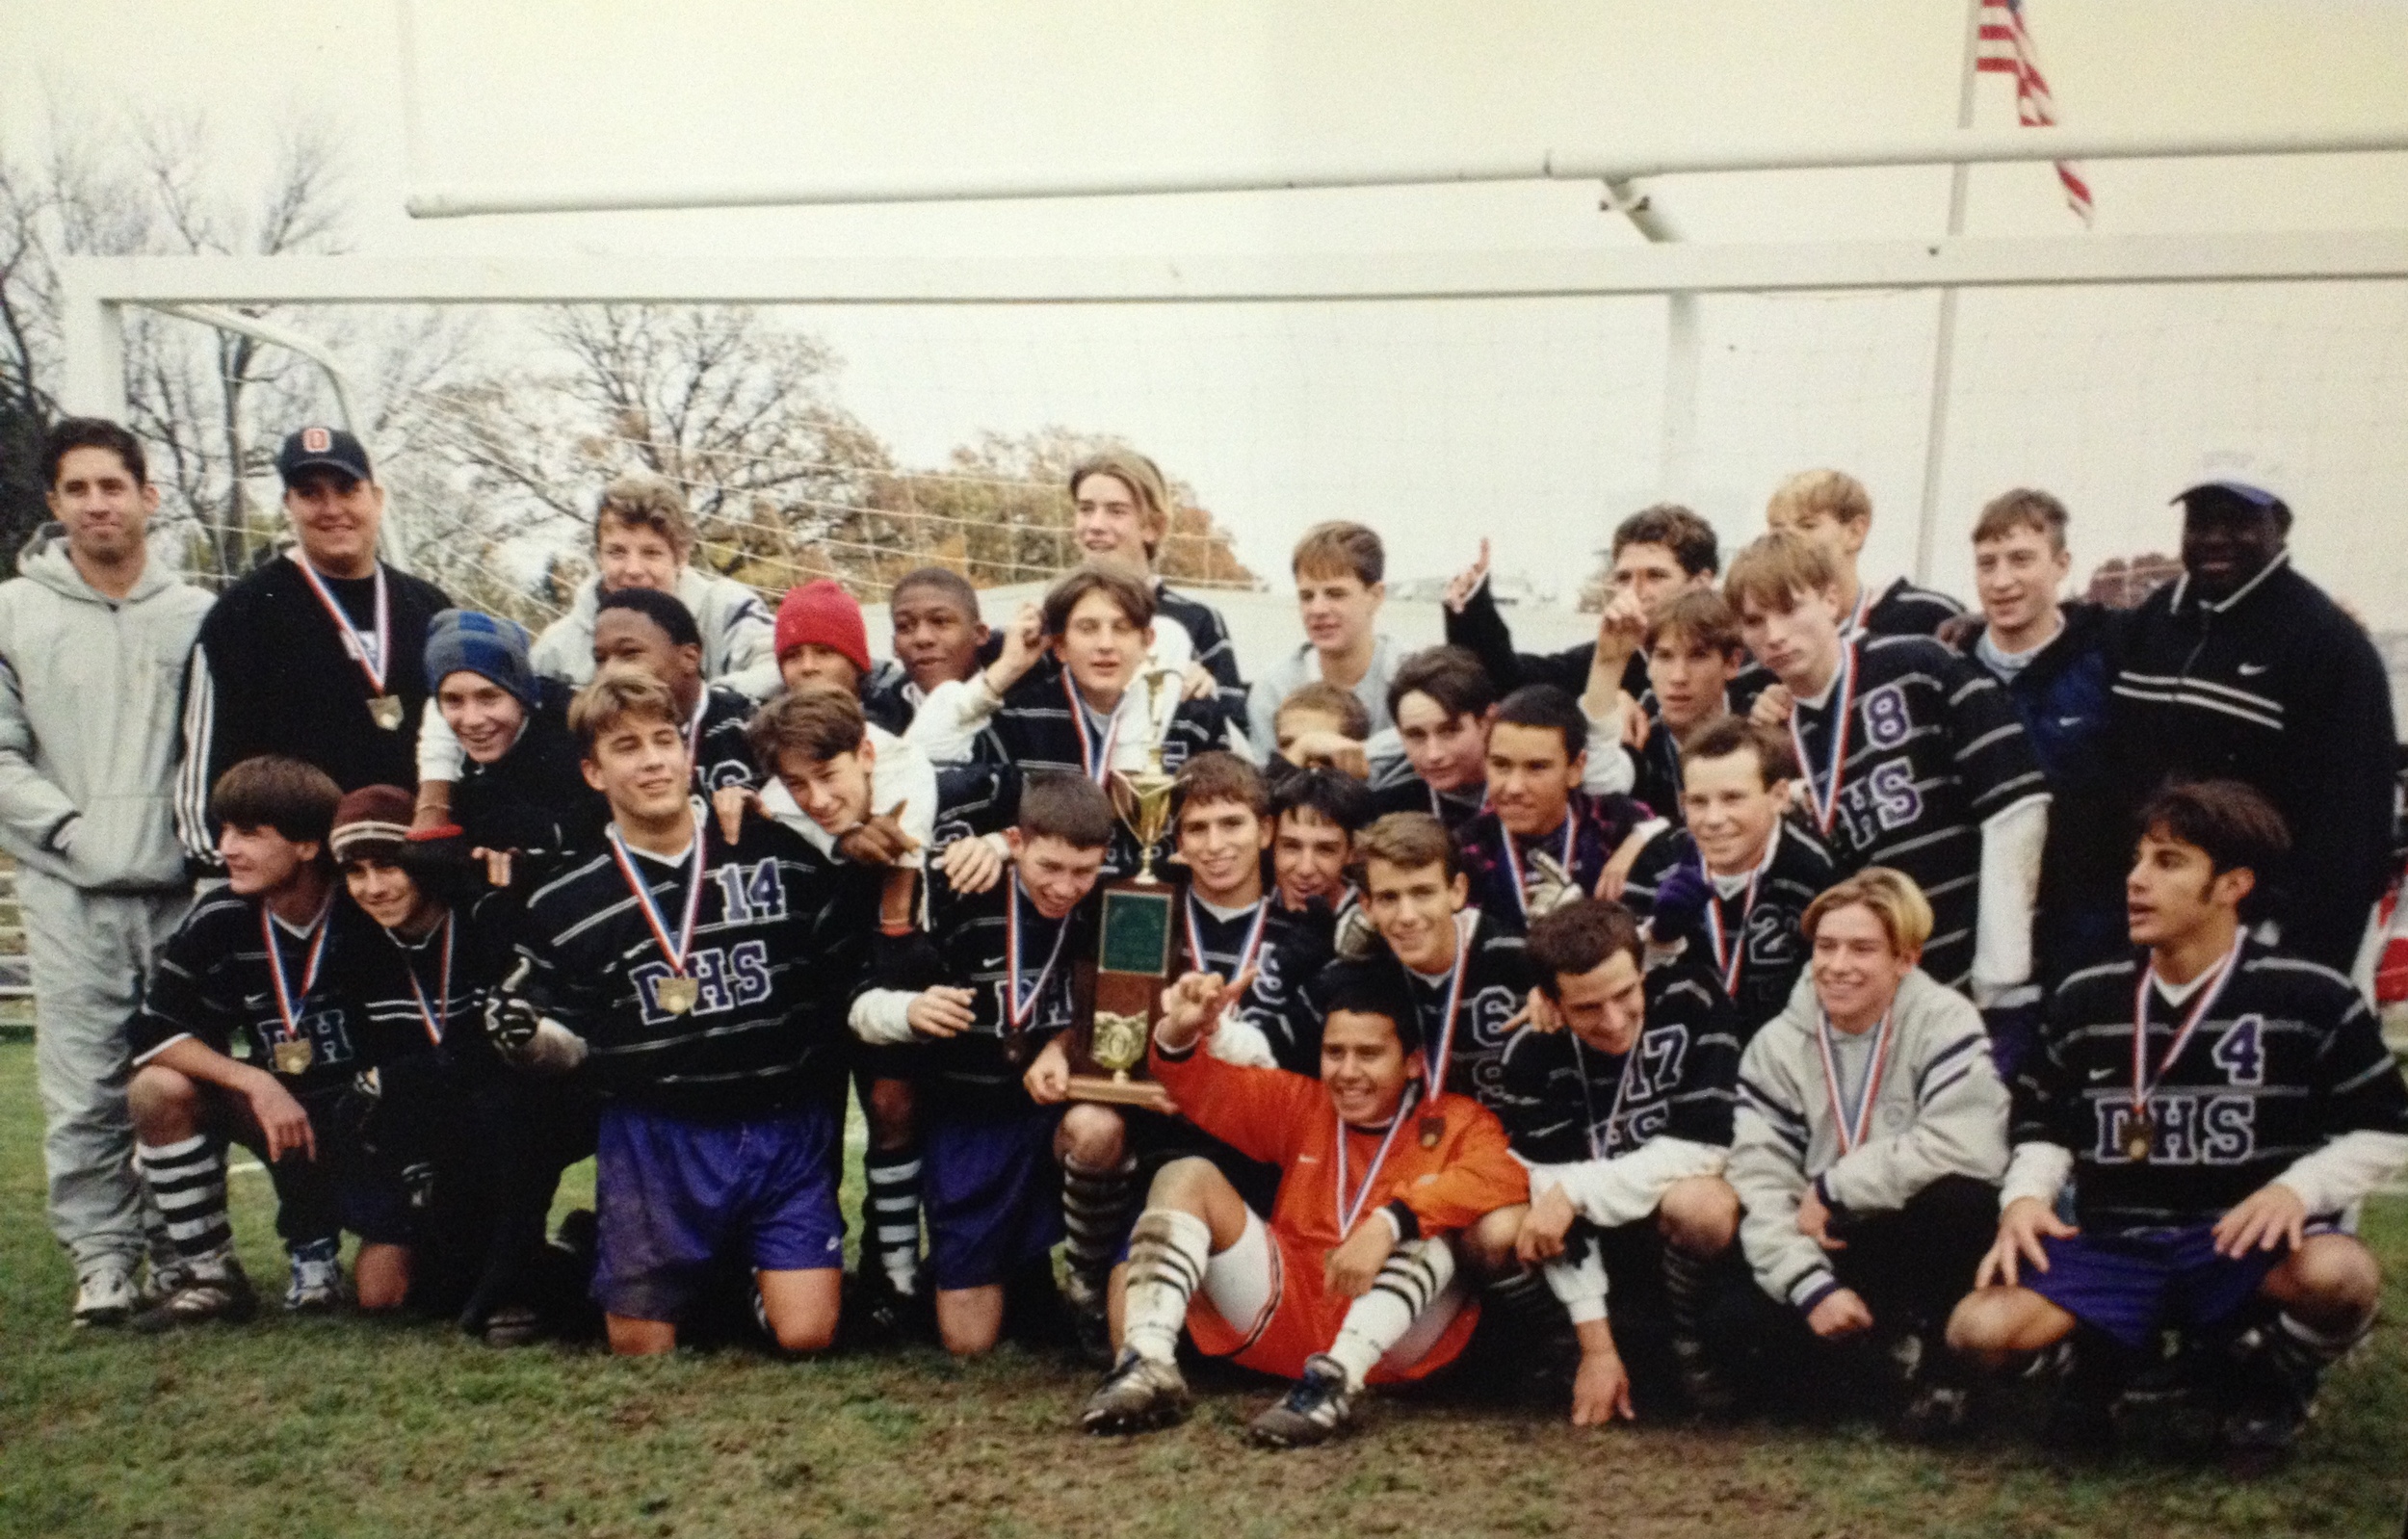   1997 STATE CHAMPIONS  Boys Soccer 